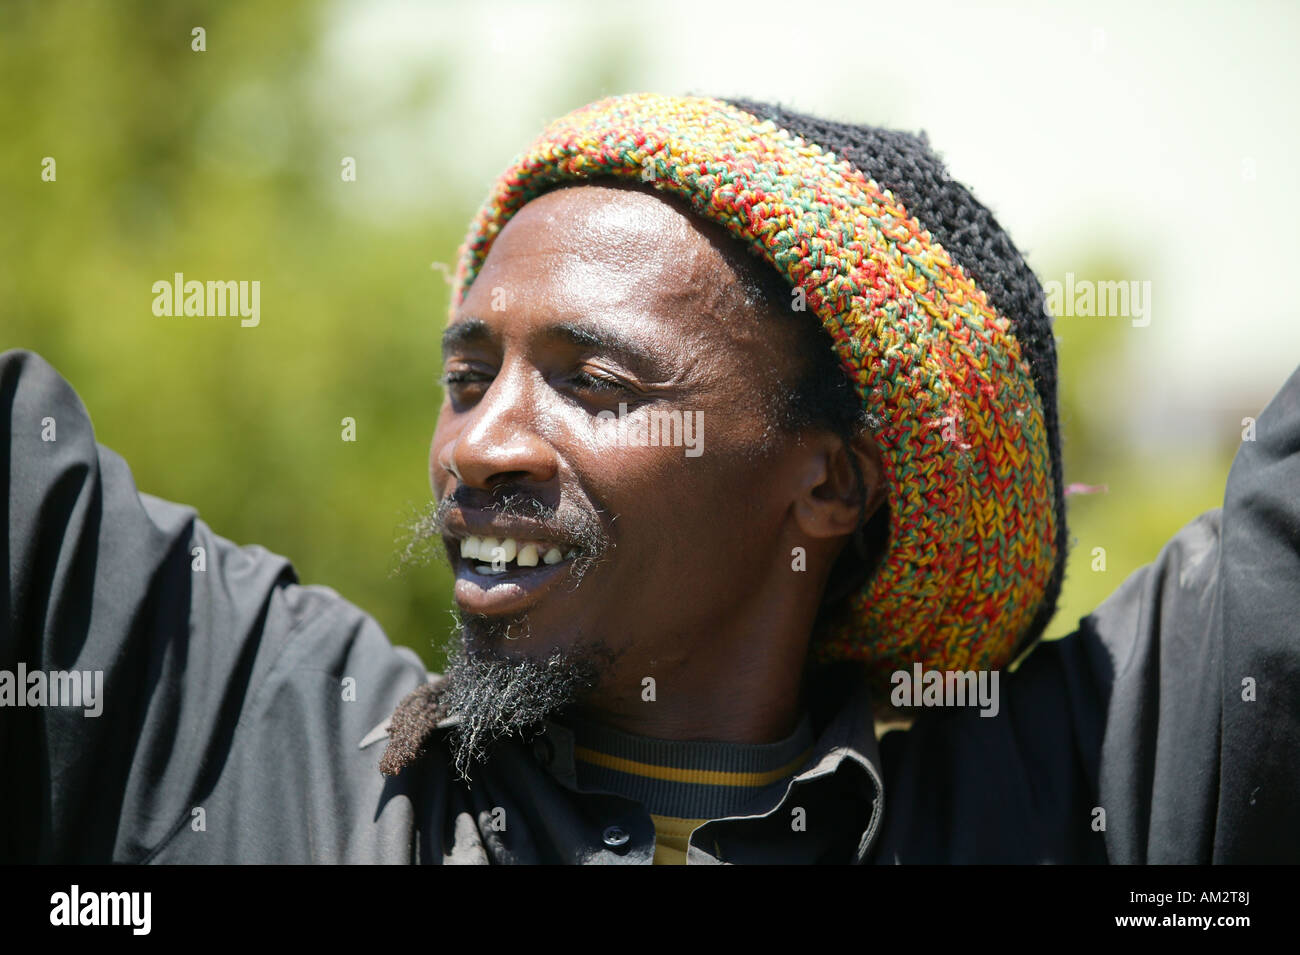 Rasta Cap High Resolution Stock Photography and Images - Alamy